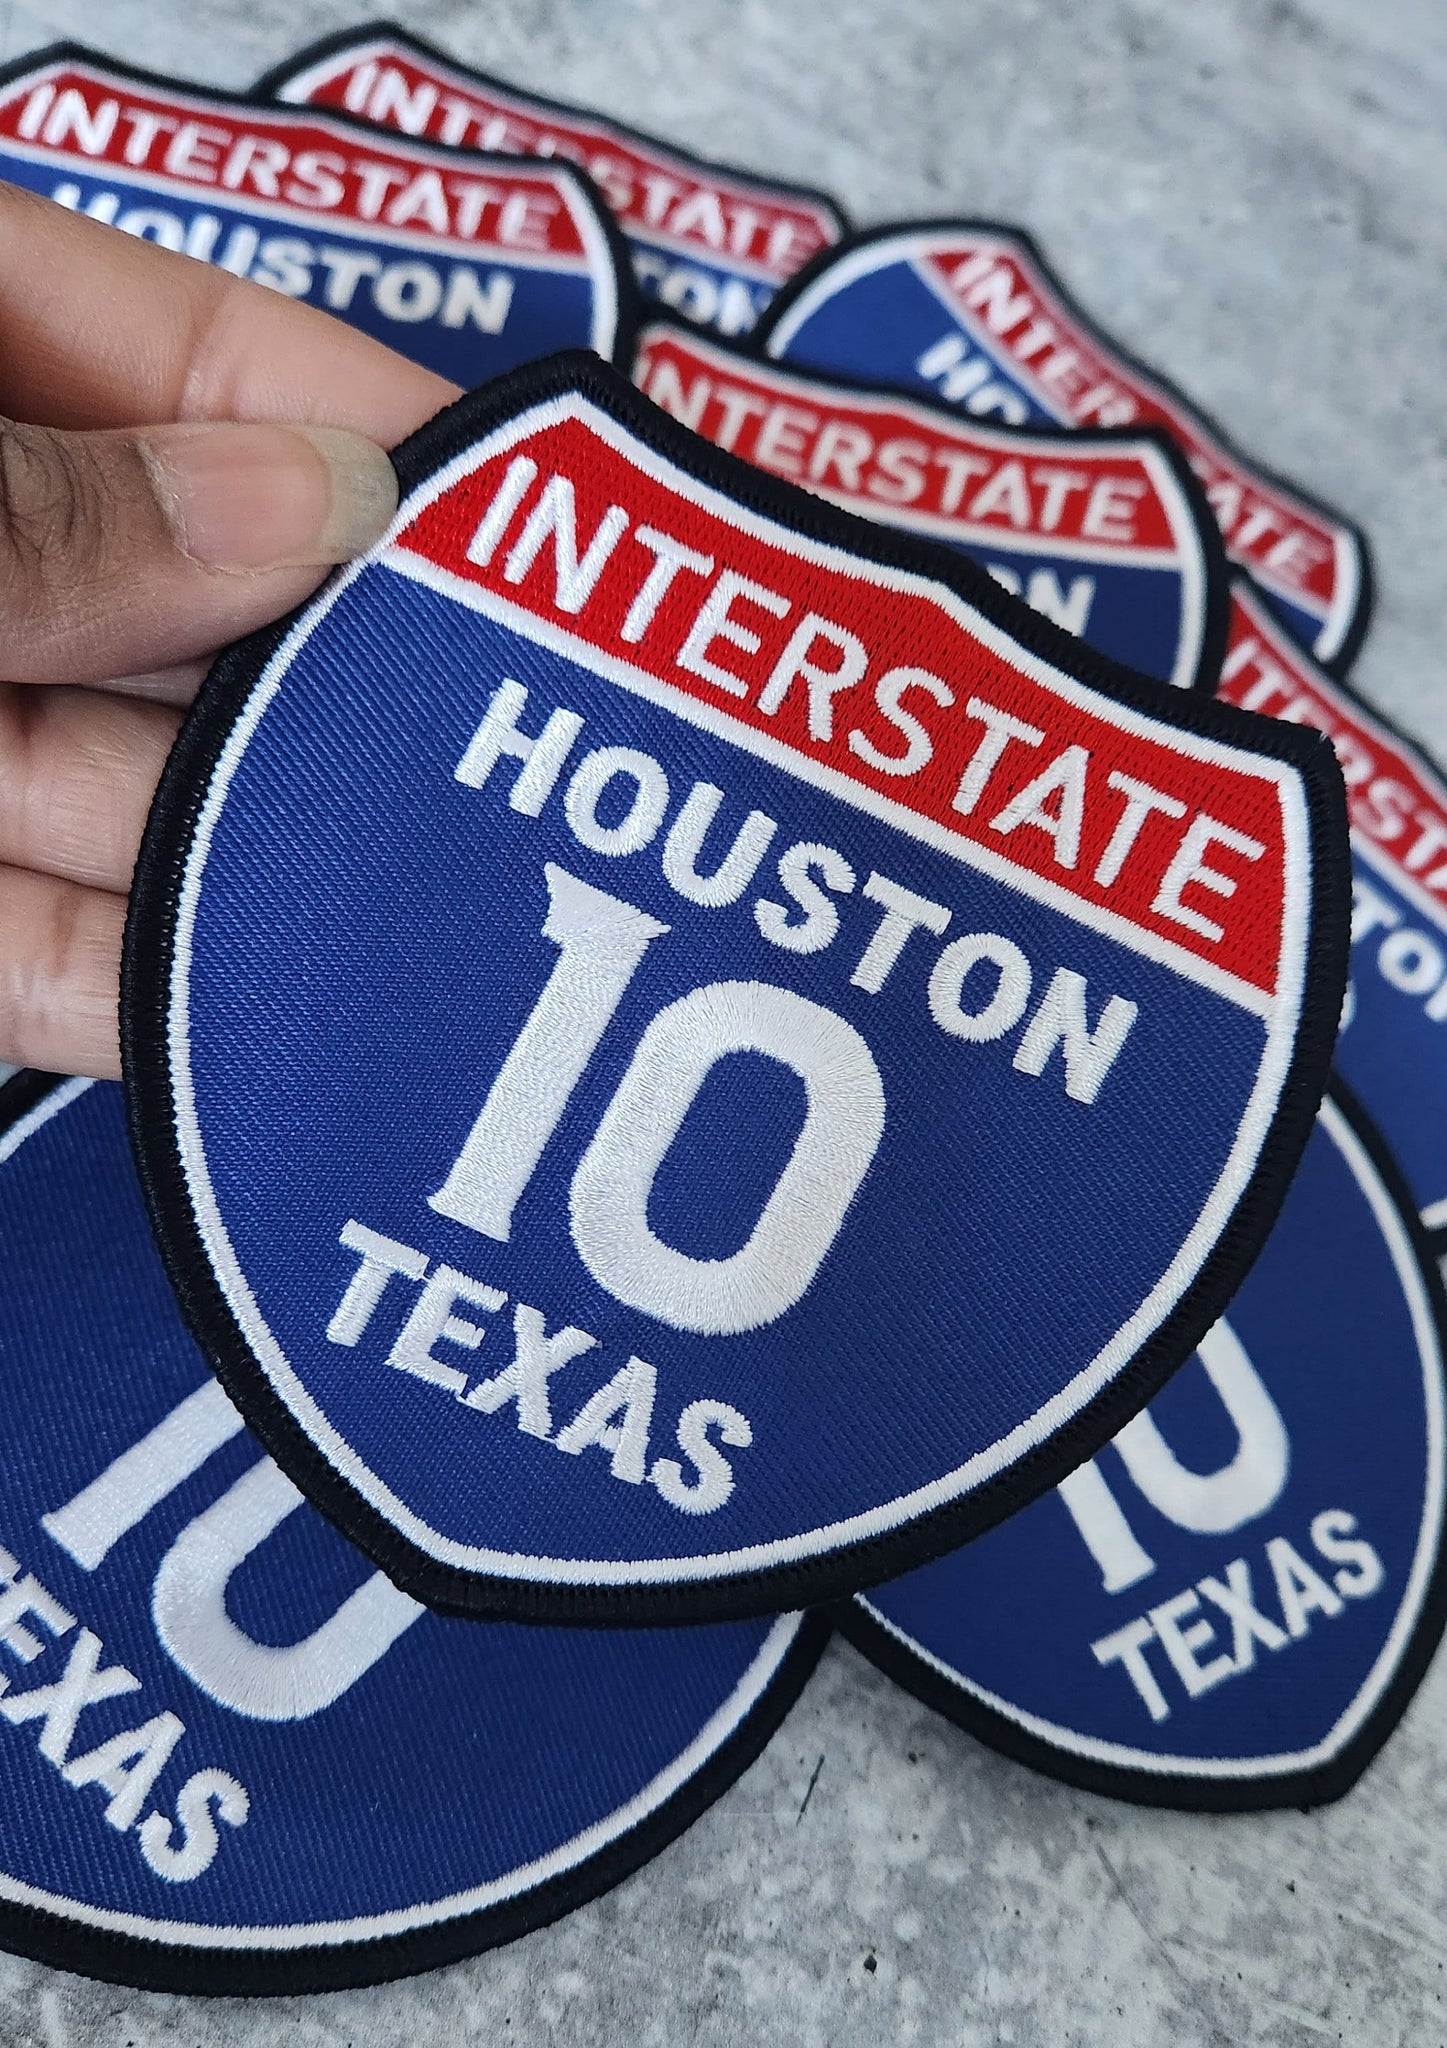 Collectable 1-pc, "HOUSTON 4" Interstate 10" Iron-On Embroidered Patch; Popular Texas Emblem, Red/White/Blue Badge, 1-pc, Patch for Jackets